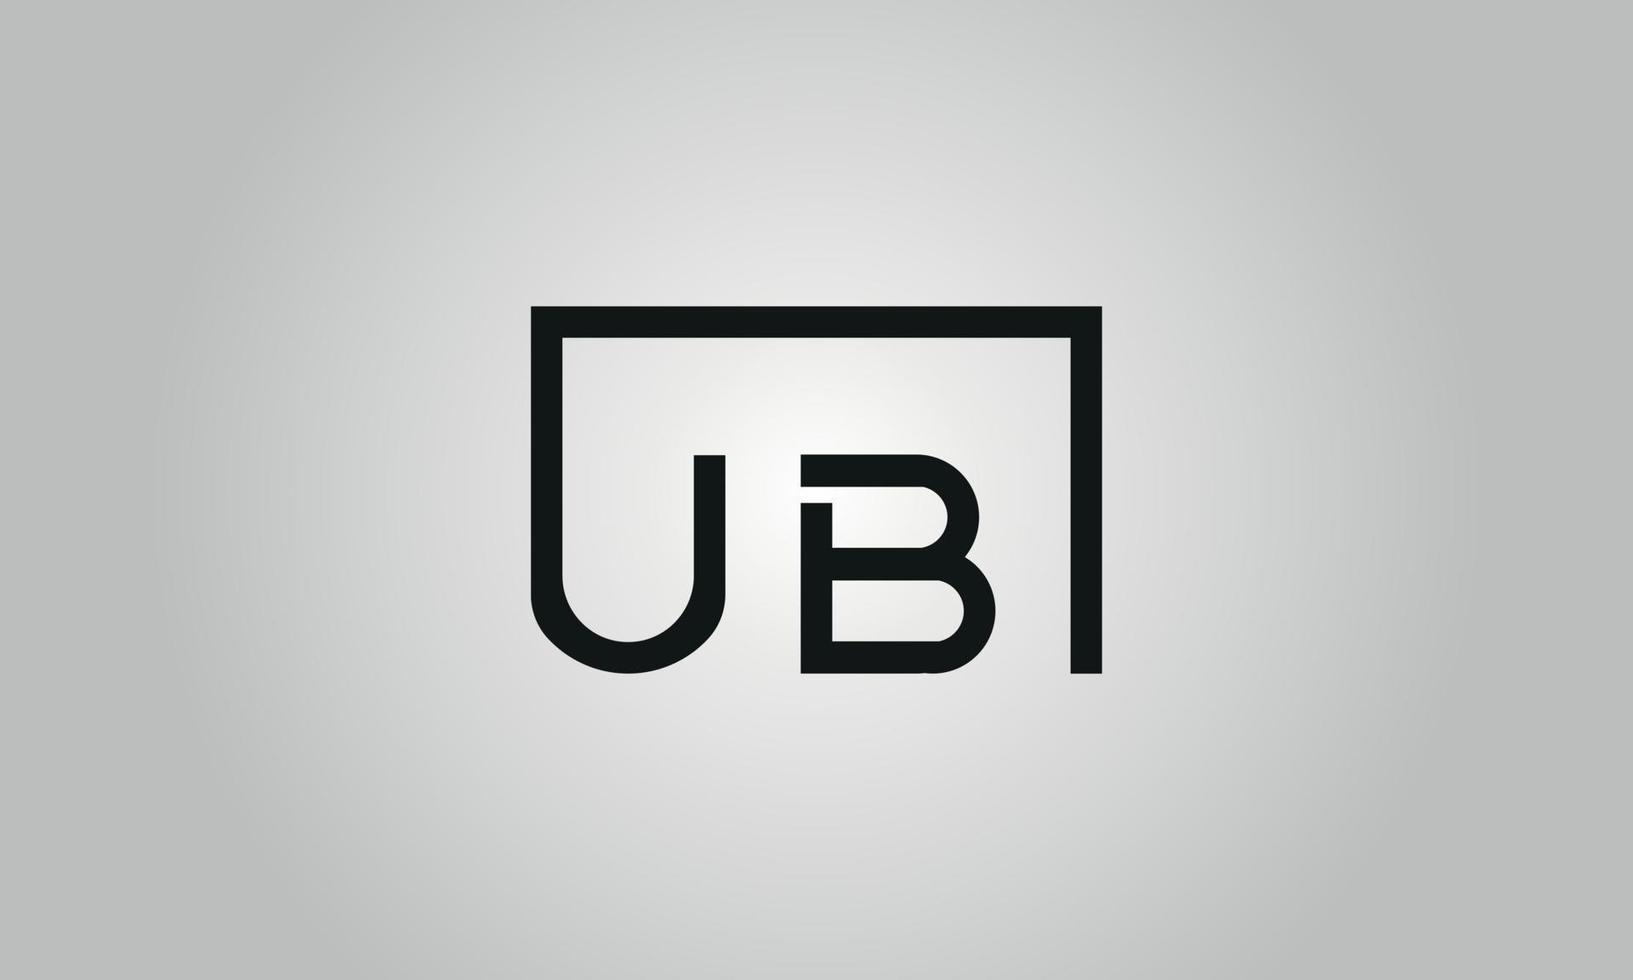 Letter UB logo design. UB logo with square shape in black colors vector free vector template.